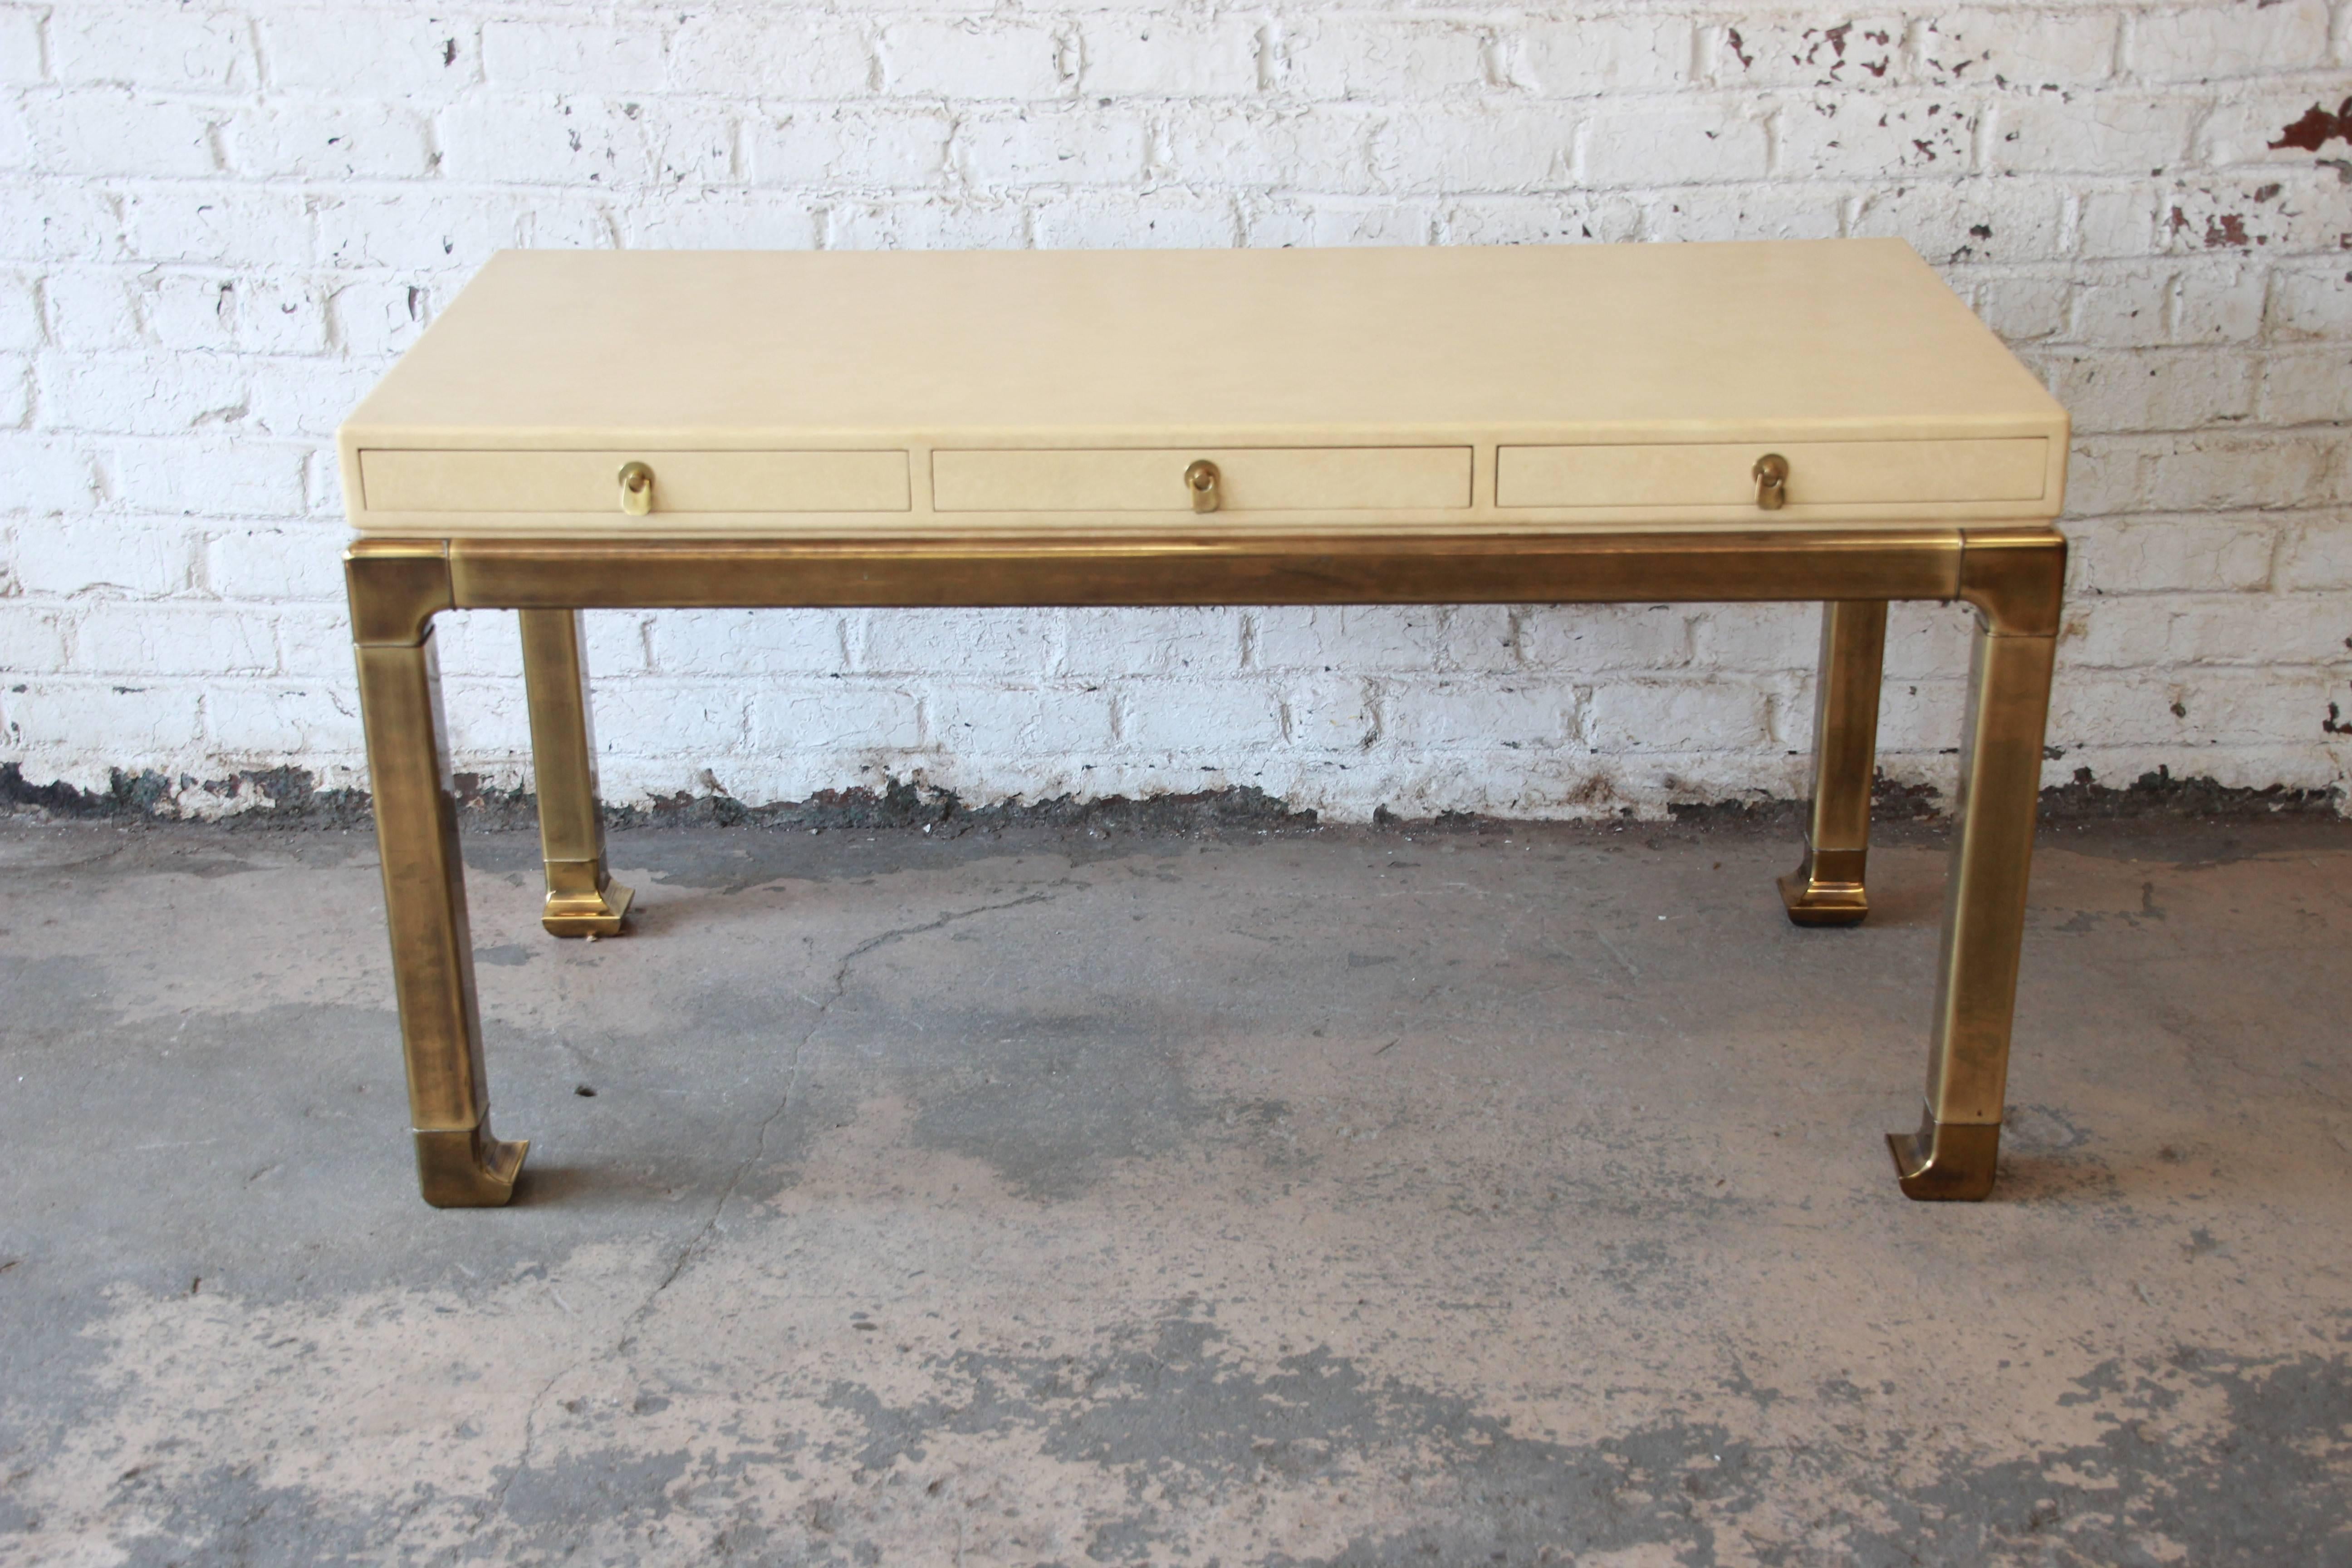 Offering a stunning brass and faux shagreen chinoiserie style desk. The desk has a large writing surface with three drawers with solid brass pulls. The brass legs descend to a nice curved Asian Style foot. This beautiful and rare statement piece